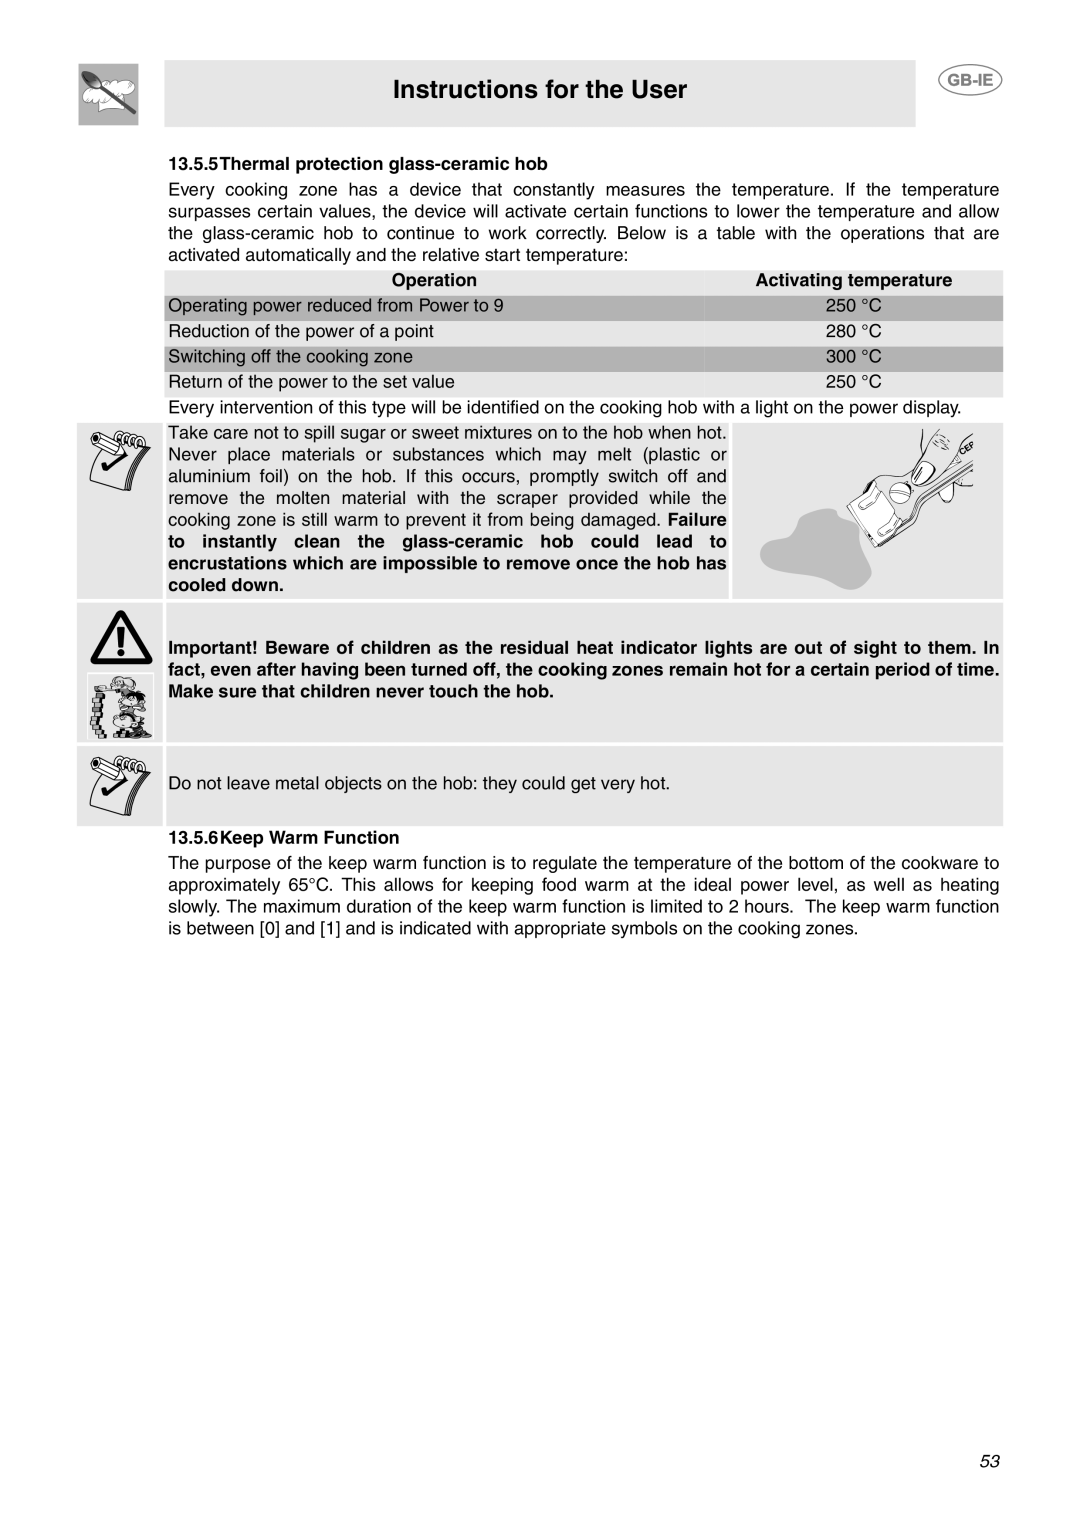 Smeg CE92IMX Instructions for the User, 13.5.5Thermal protection glass-ceramic hob, Operation, Activating temperature 